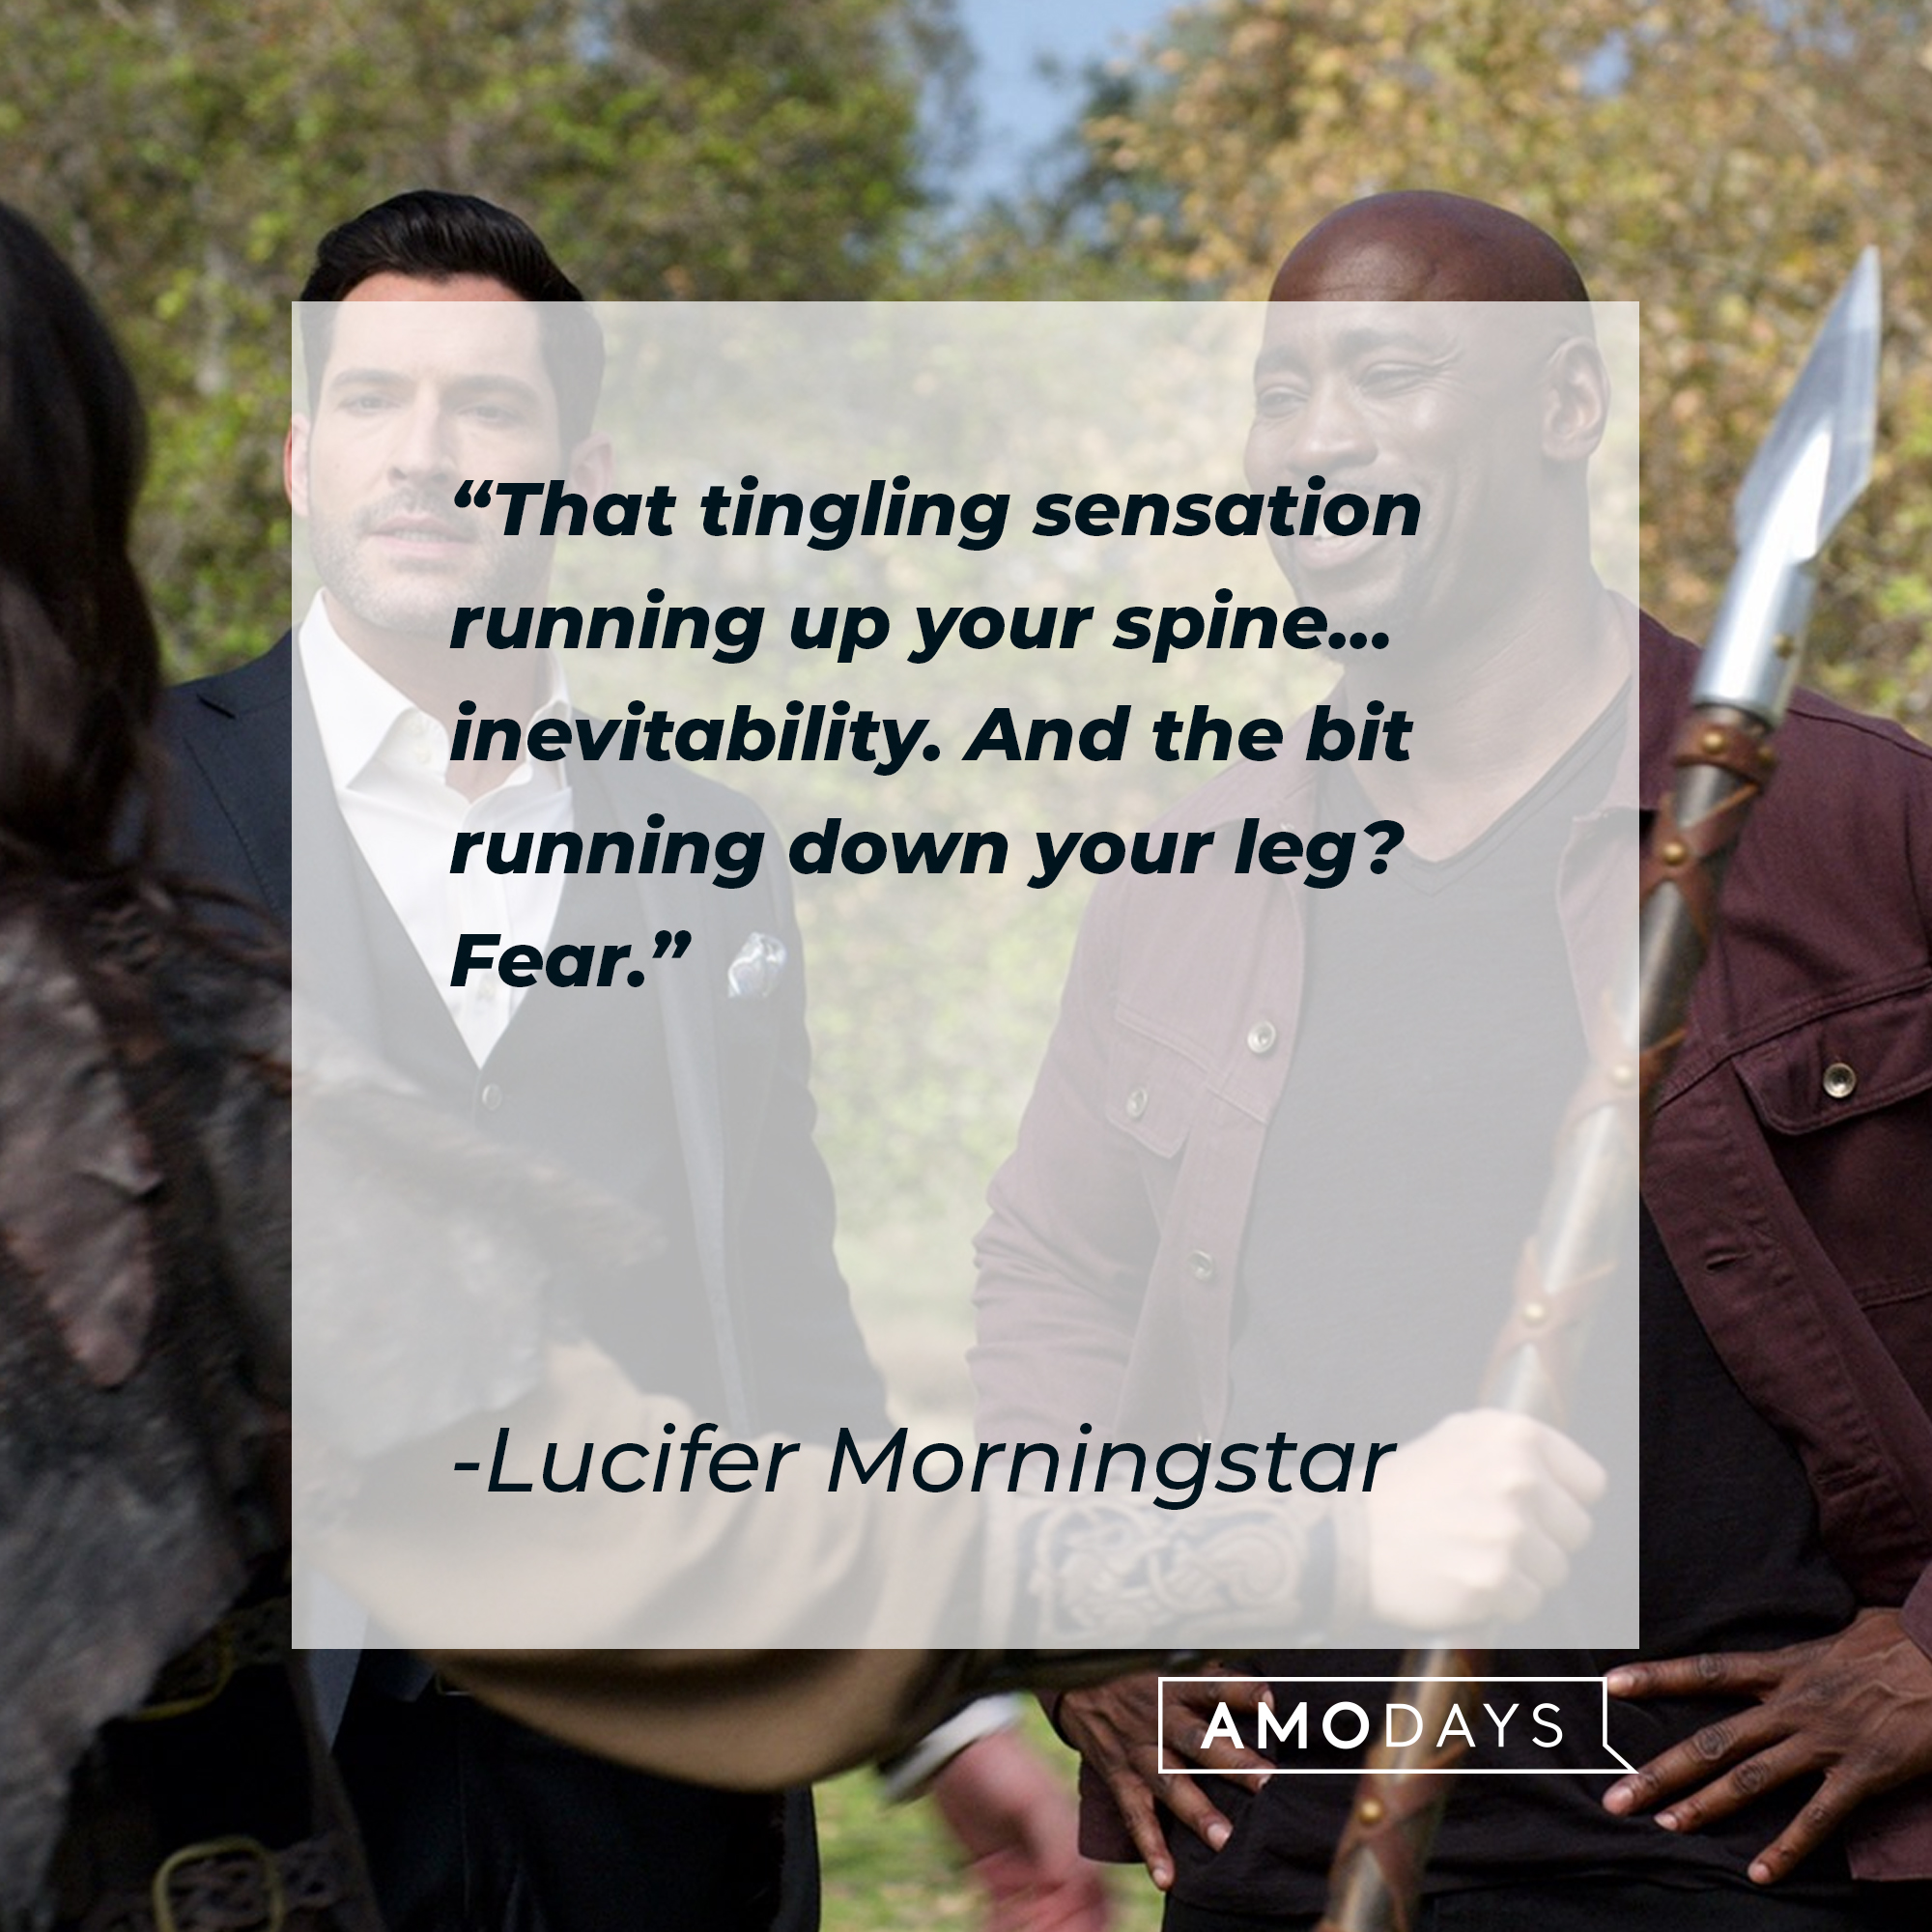 Lucifer Morningstar’s quote: "That tingling sensation running up your spine… inevitability. And the bit running down your leg? Fear." | Source: Facebook.com/LuciferNetflix